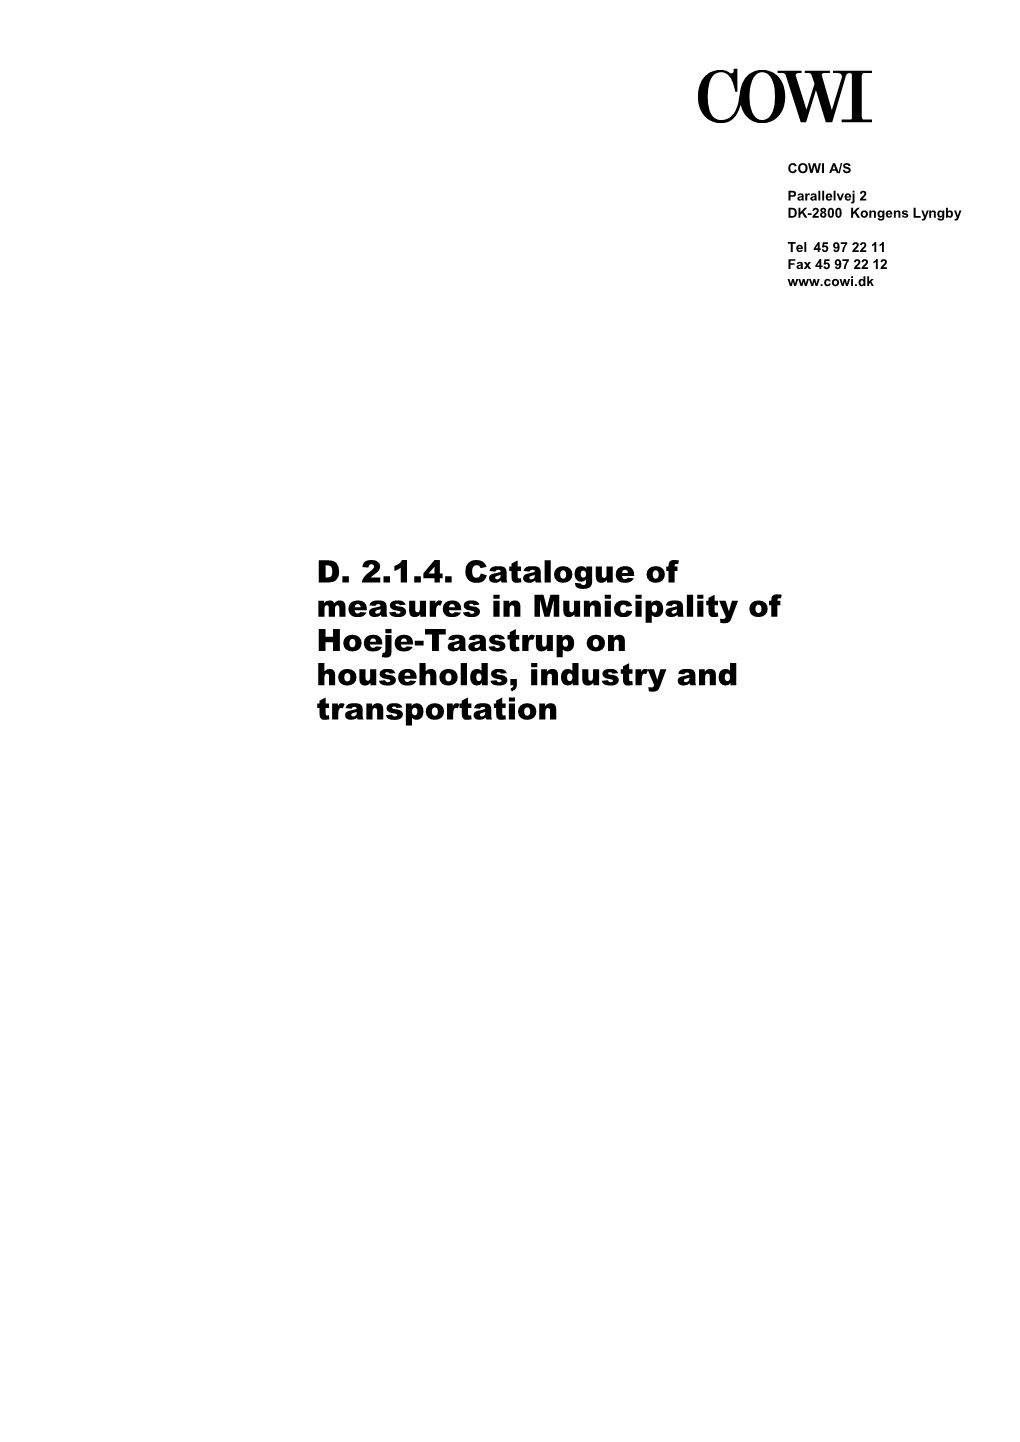 D. 2.1.4. Catalogue of Measures in Municipality of Hoeje-Taastrup on Households, Industry and Transportation